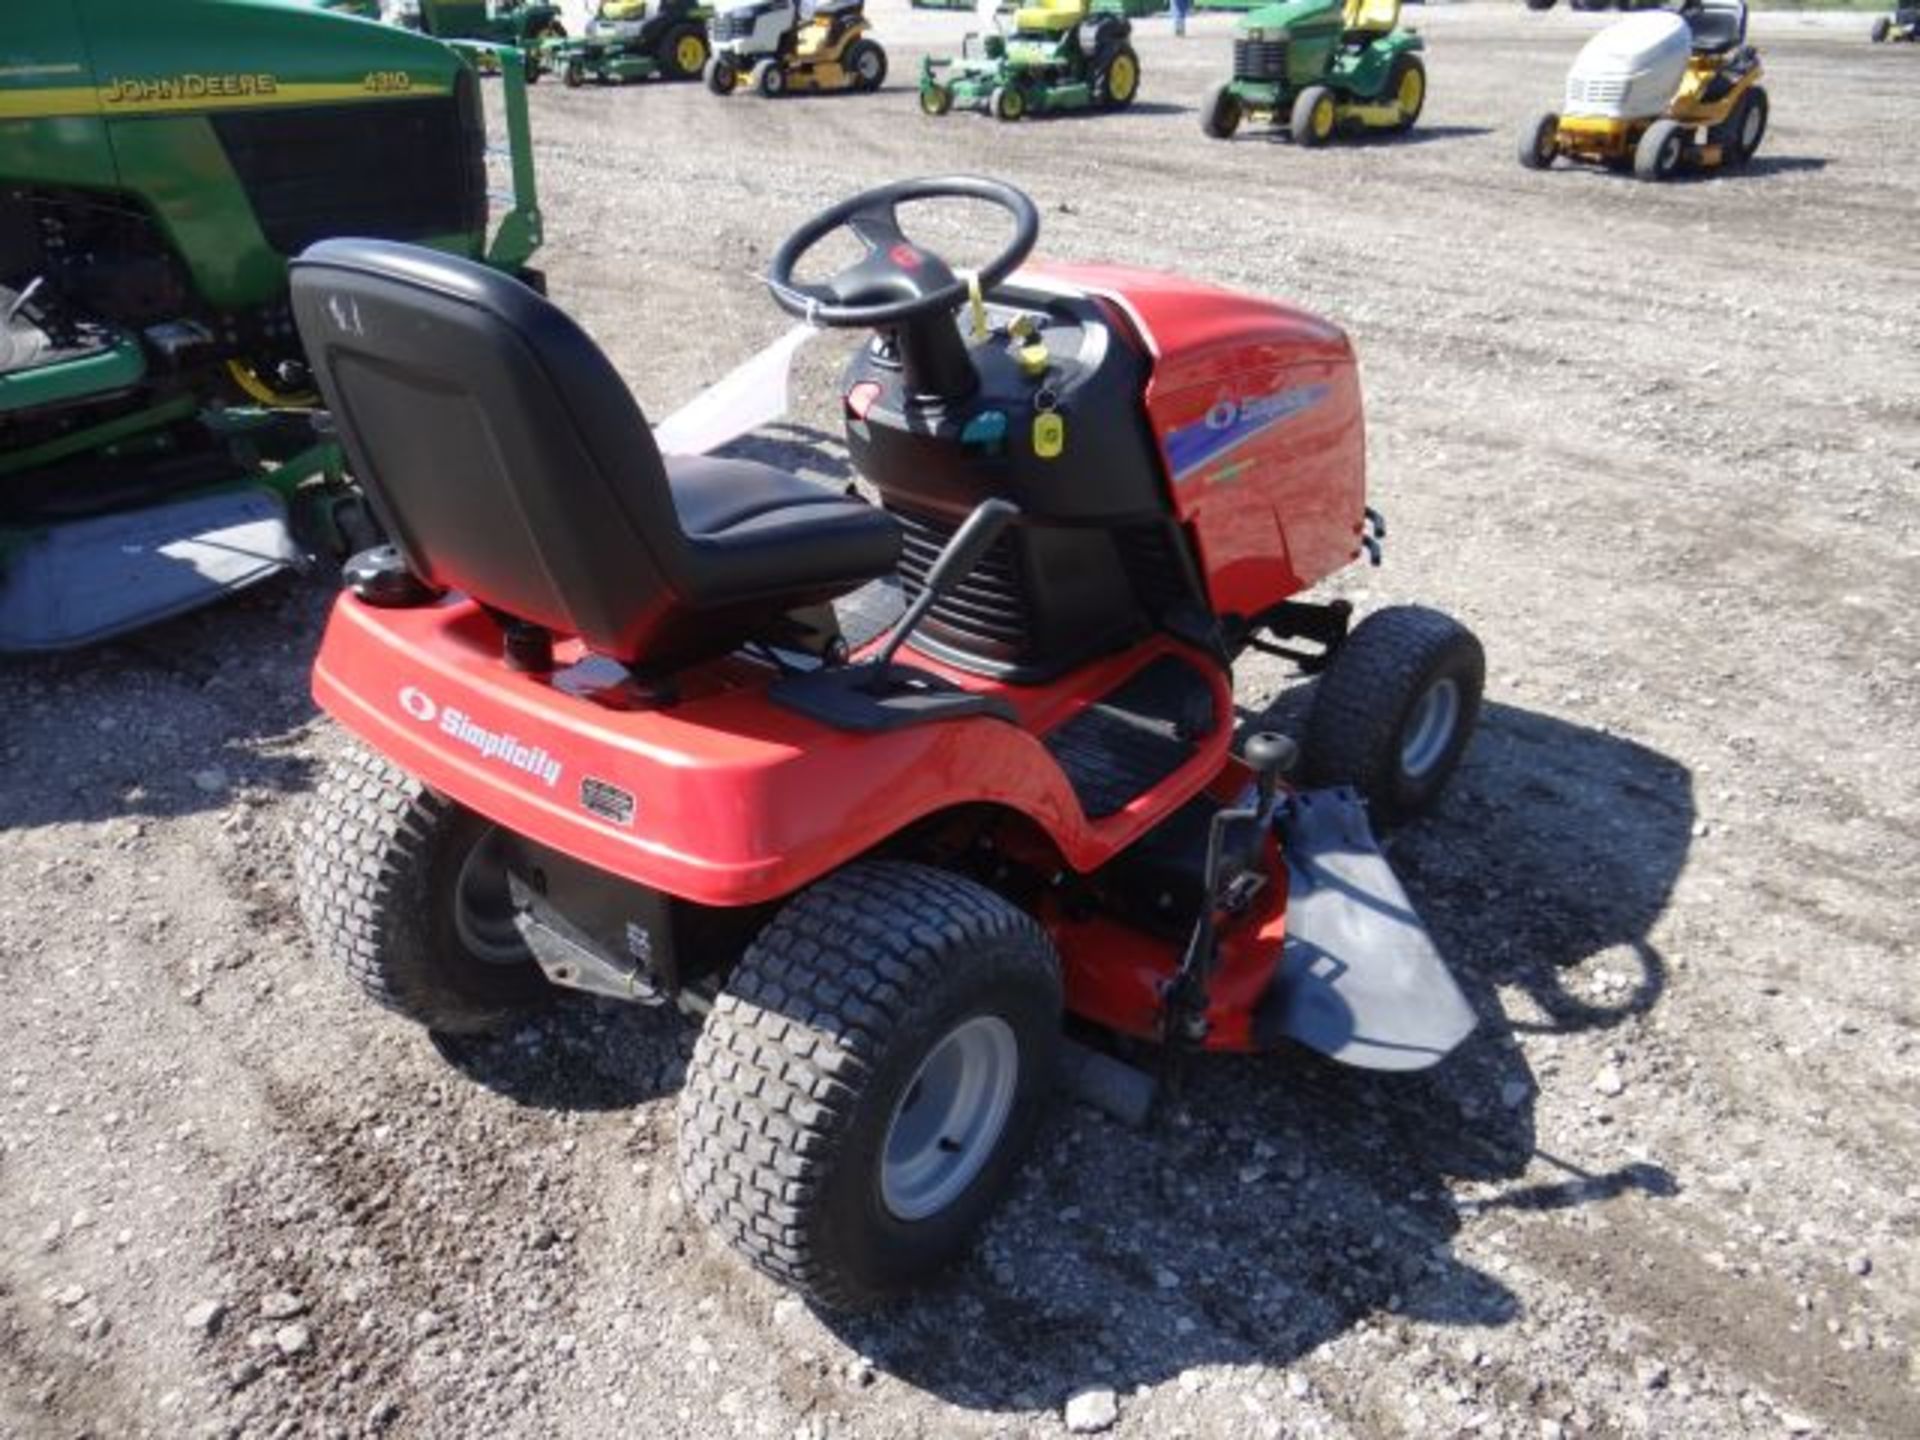 Lot 19887 - 2011 Simplicity Regent 23 Mower 114 hrs, 23hp, Air Cool, Hydro, 46" Deck, 2014219887 - Image 4 of 4